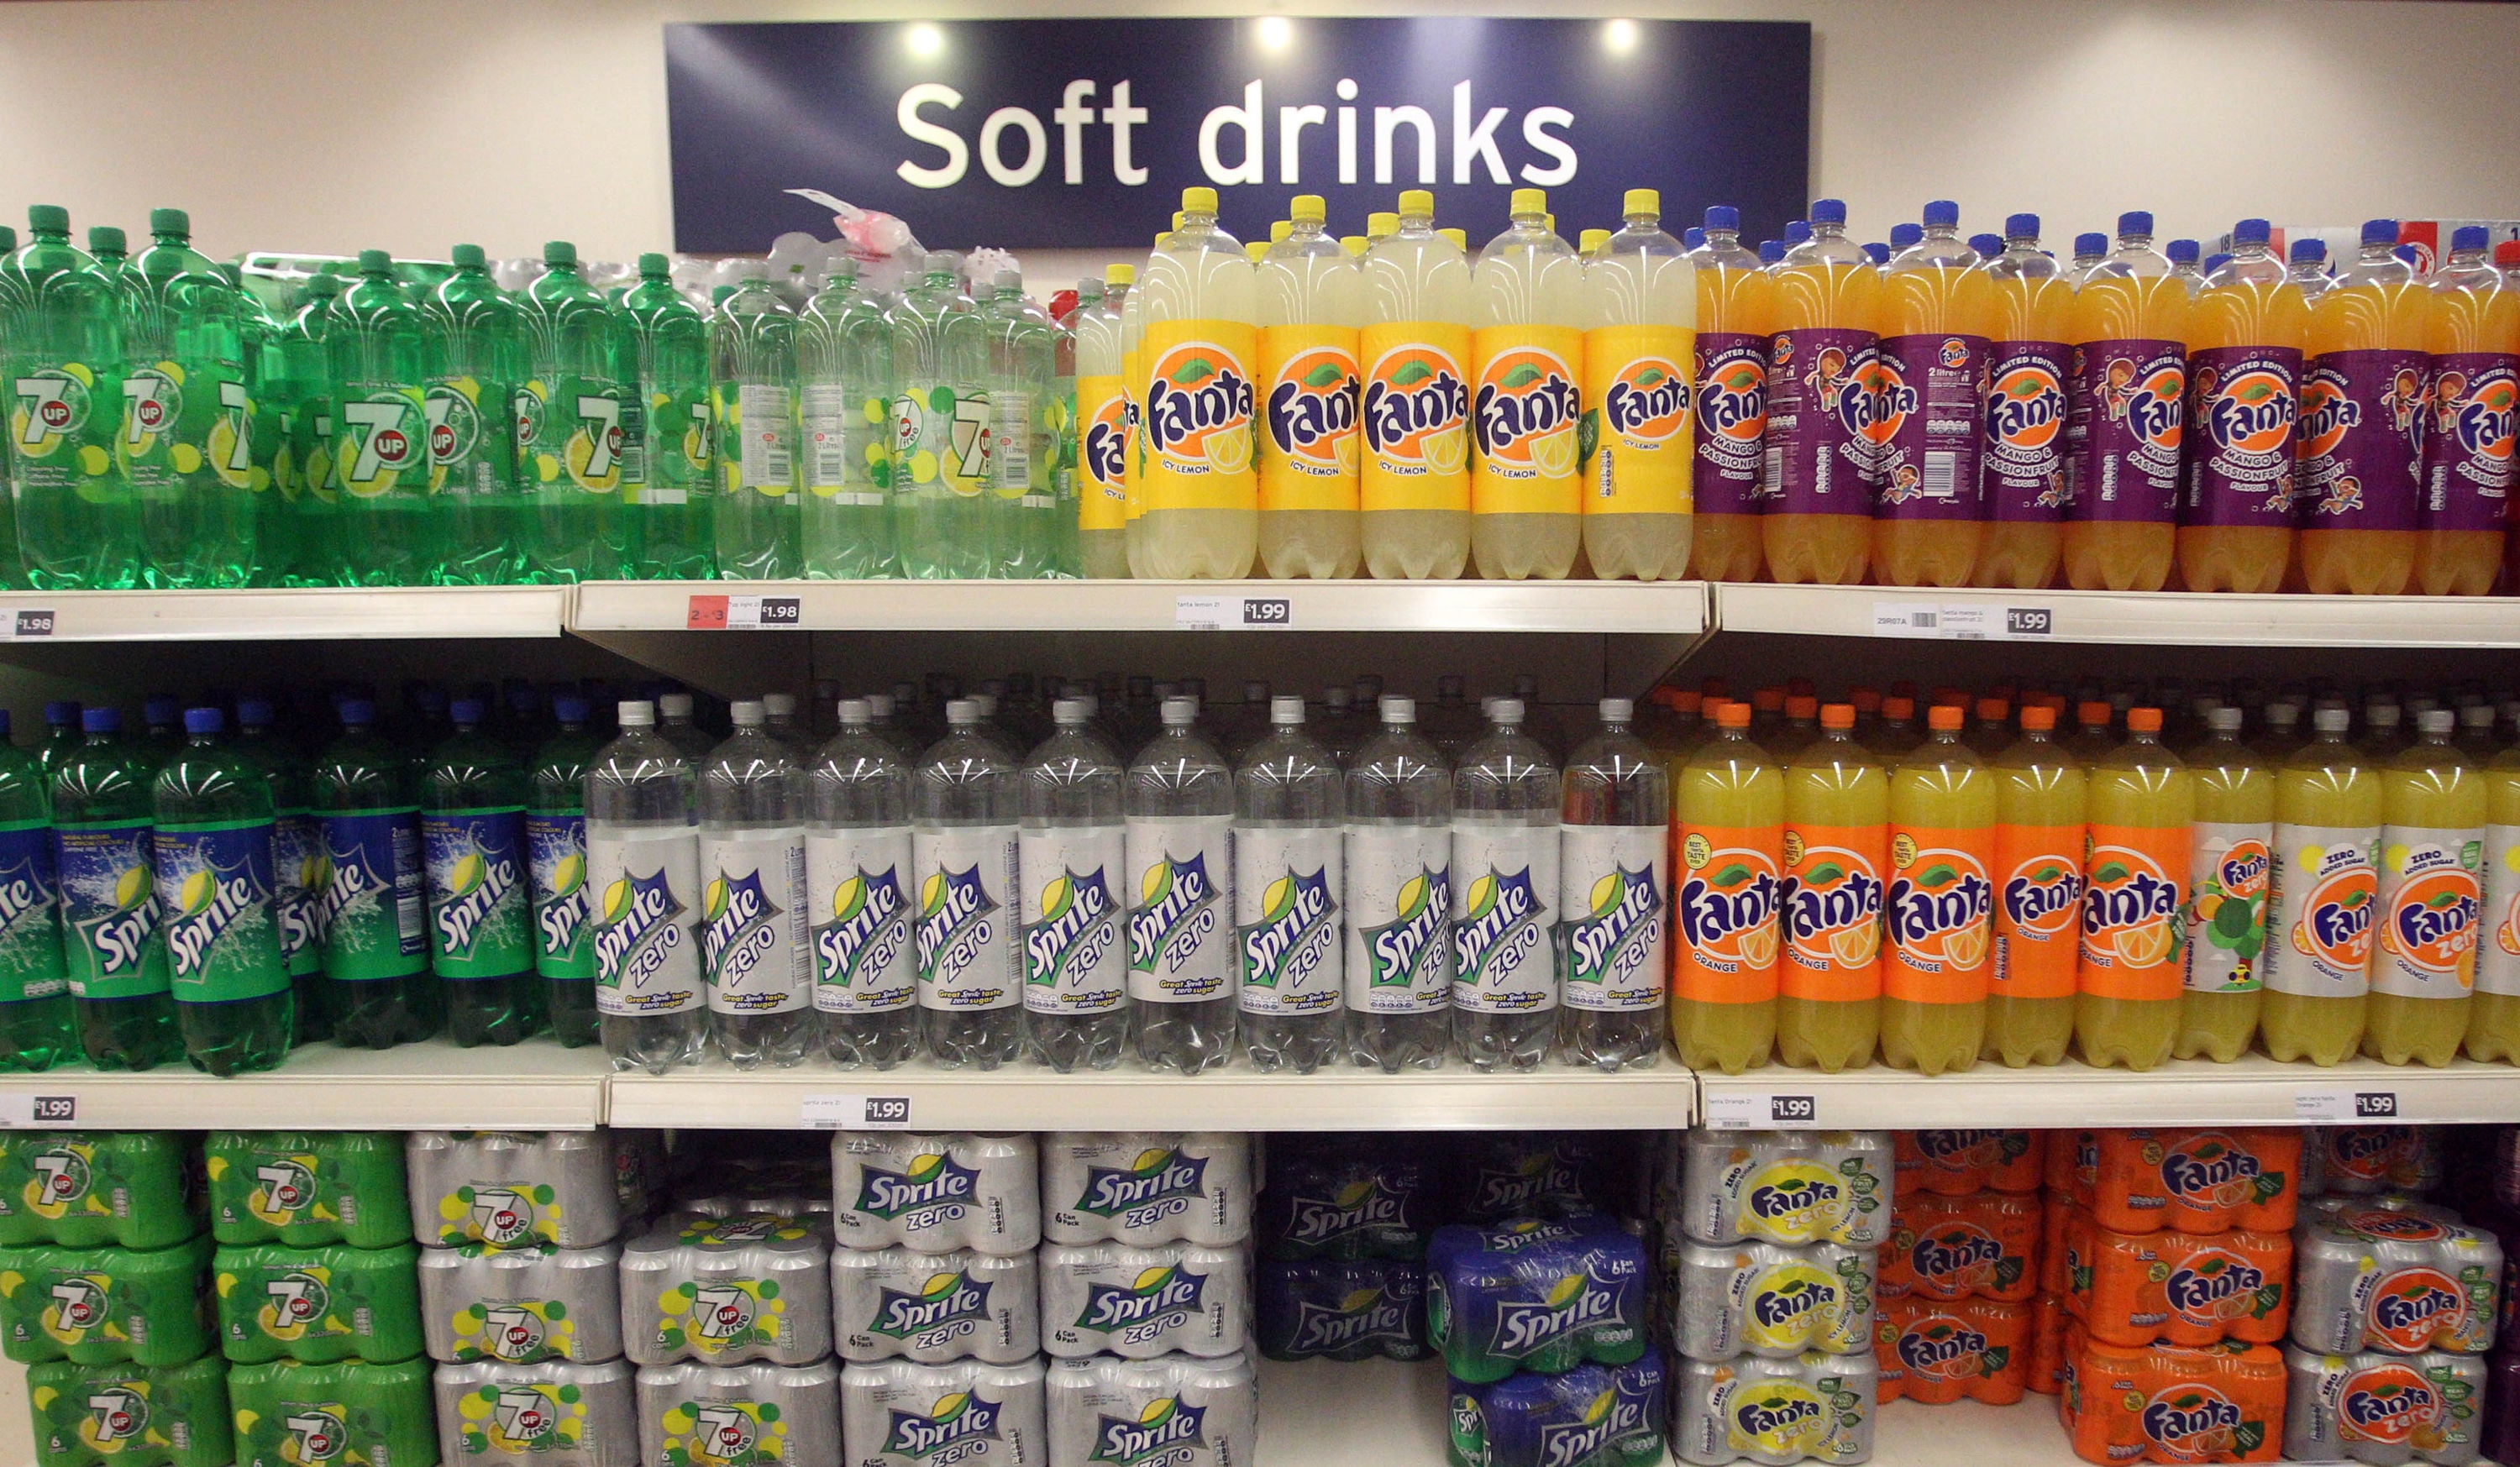 The tax came into force in April 2018, with manufacturers of soft drinks containing more than 5g of sugar per 100ml made to pay a levy of 18p a litre